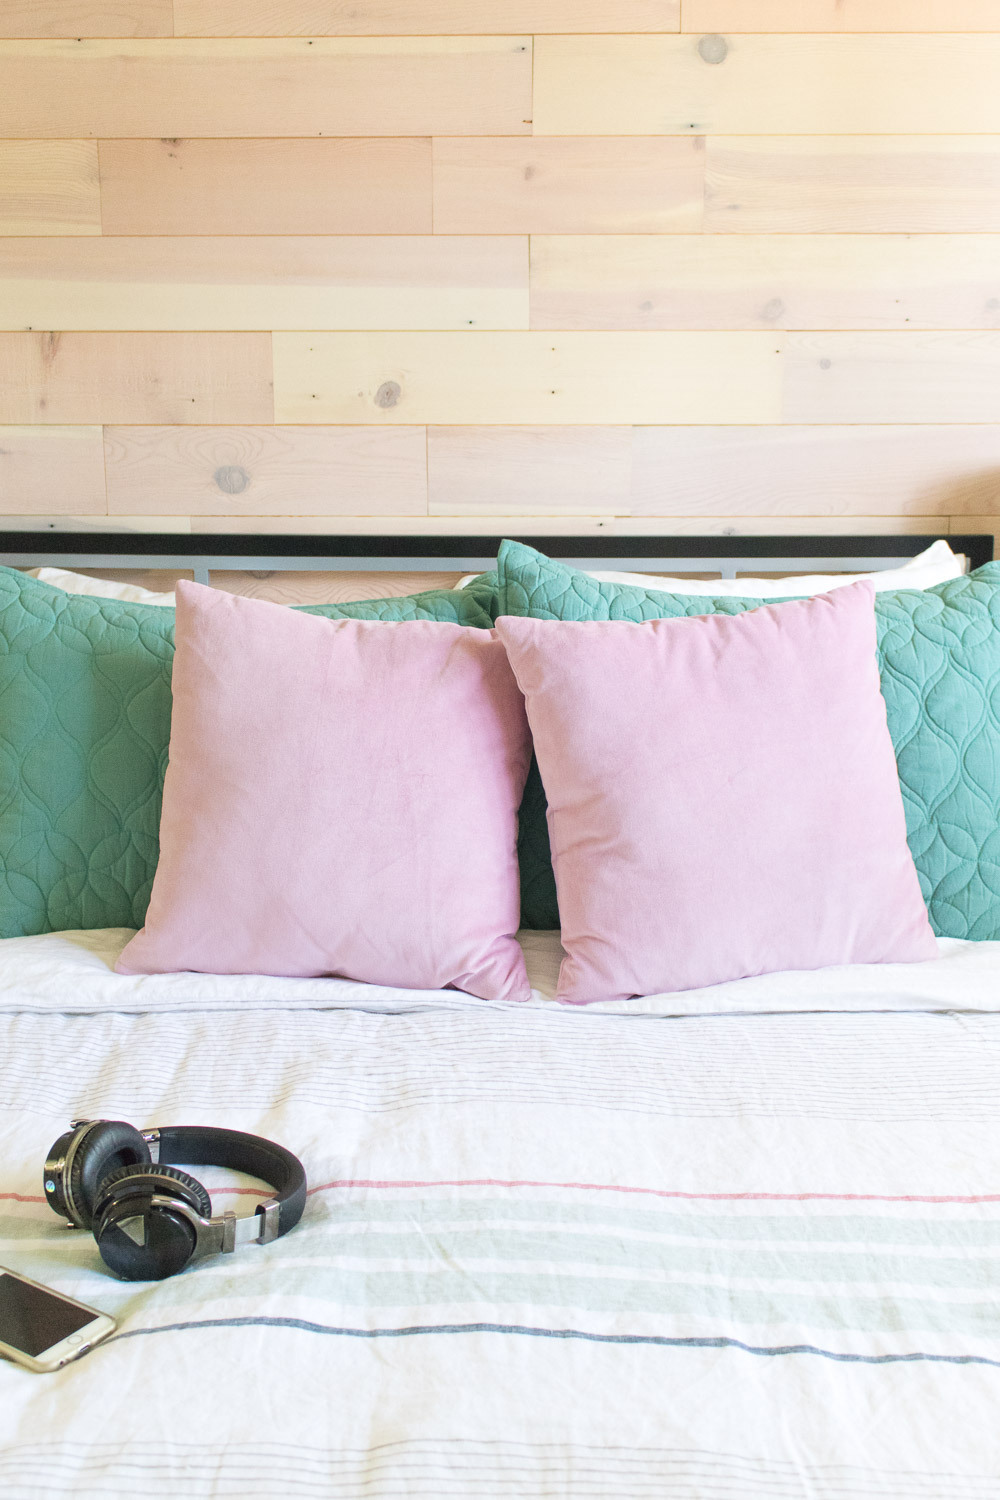 Updating our Bedroom for Summer | Club Crafted